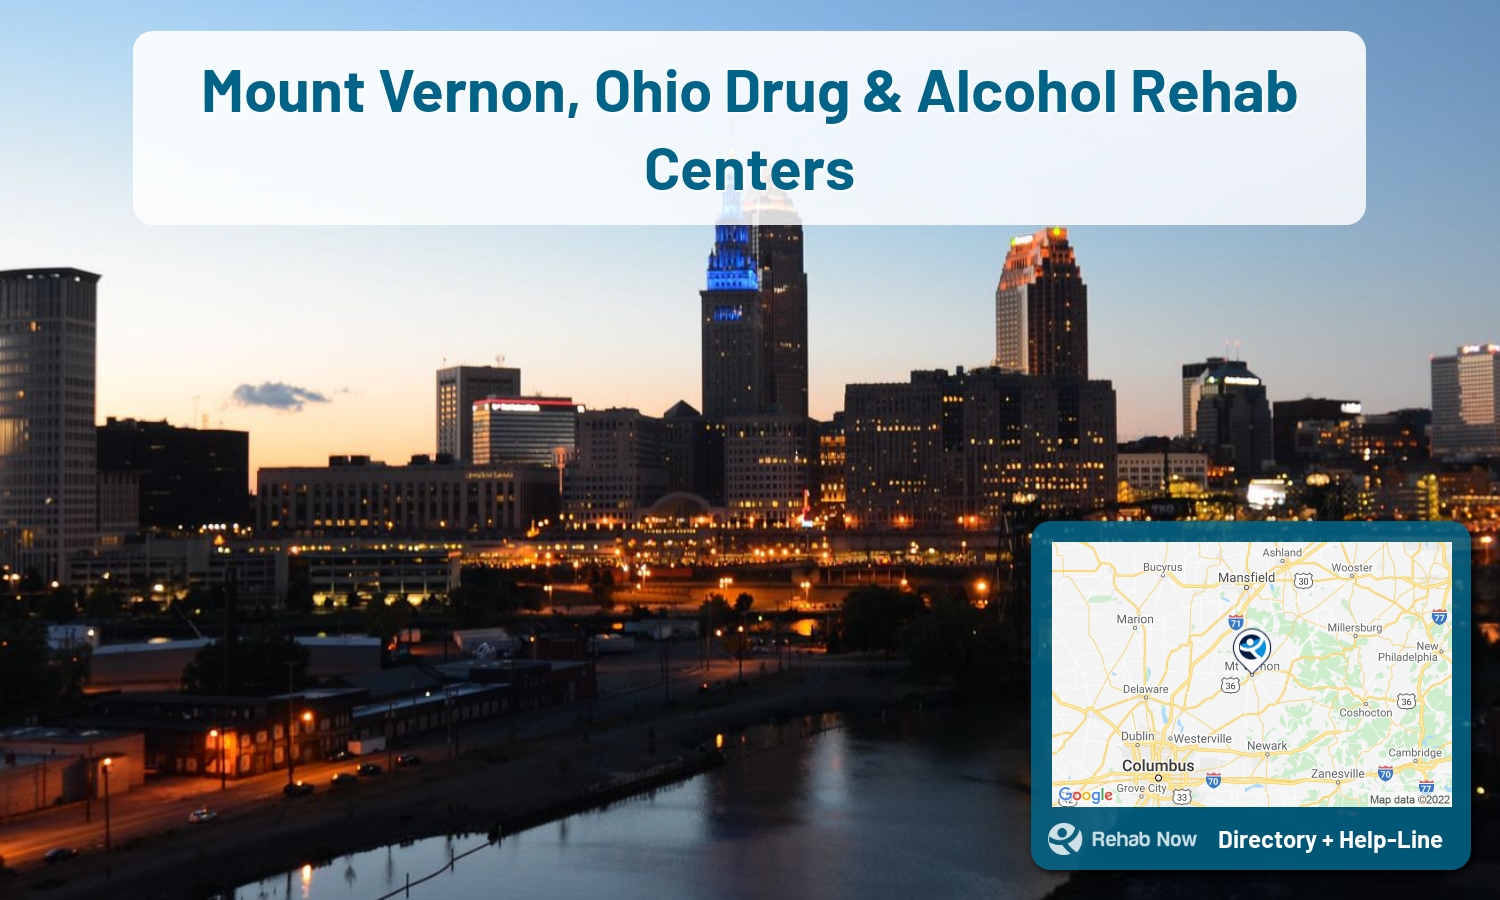 Let our expert counselors help find the best addiction treatment in Mount Vernon, Ohio now with a free call to our hotline.